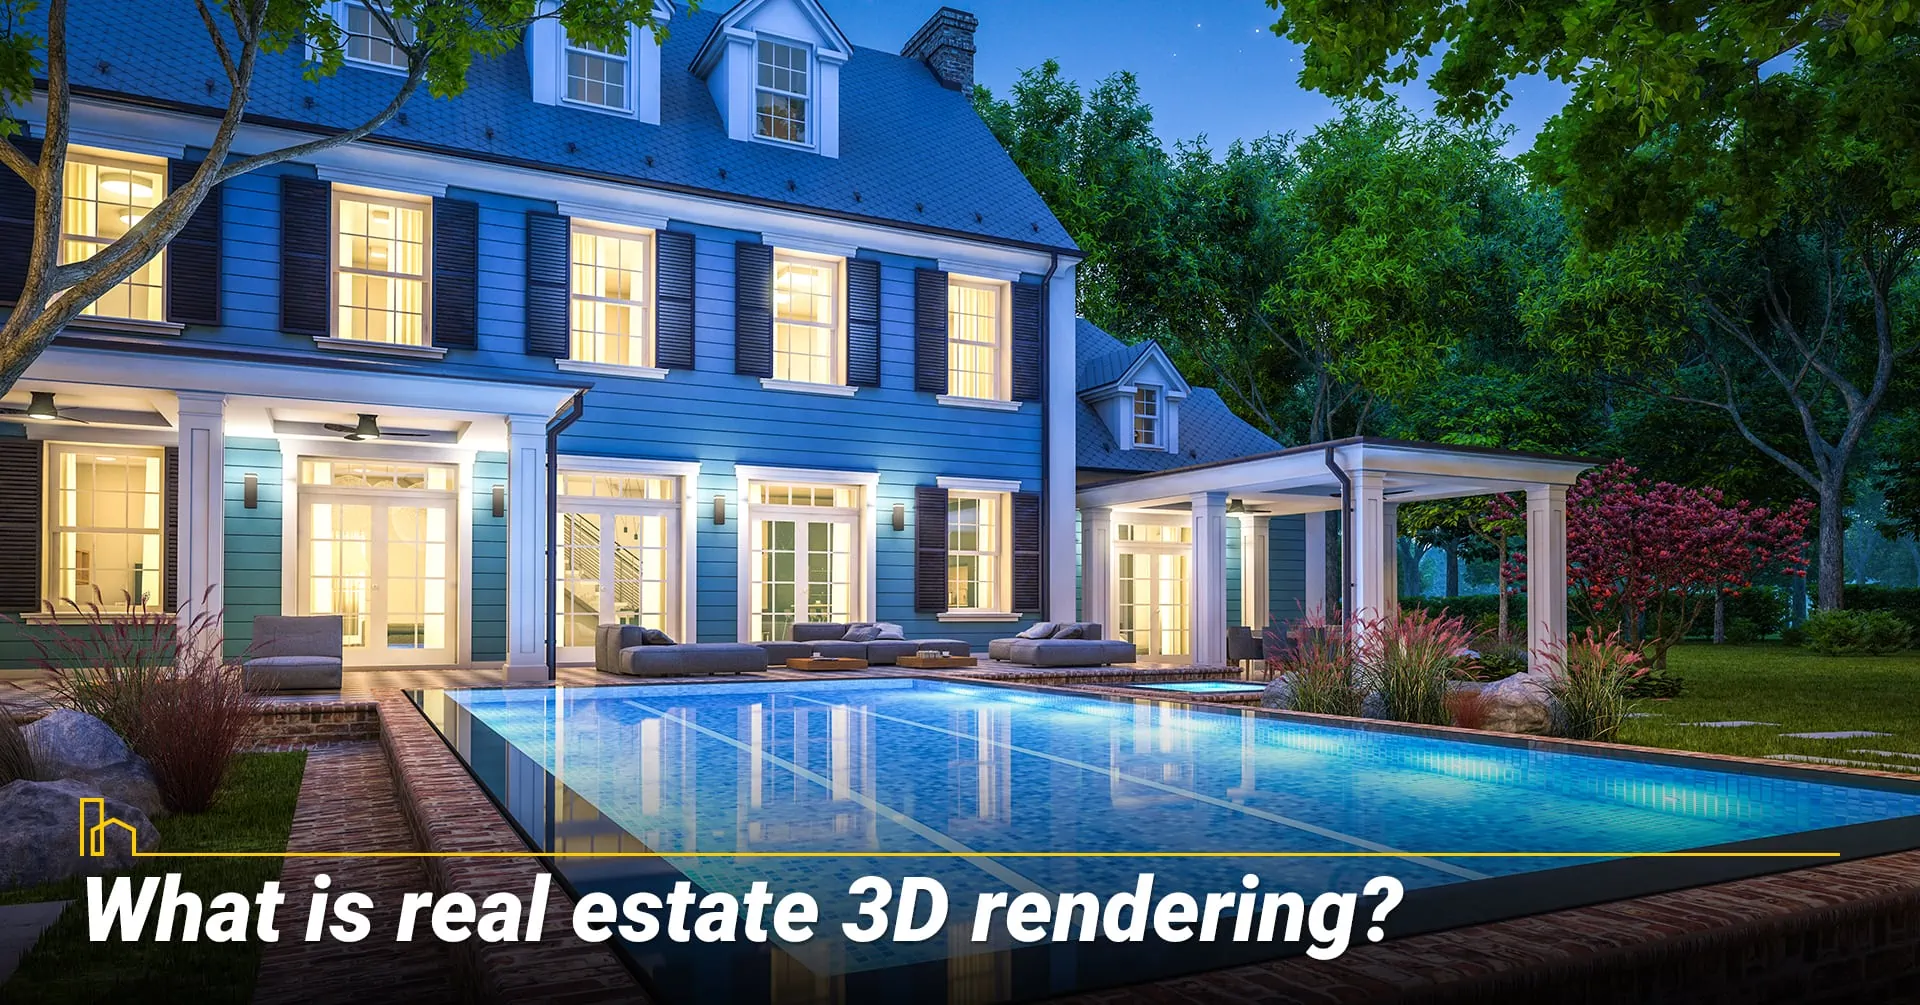 What is real estate 3D rendering?